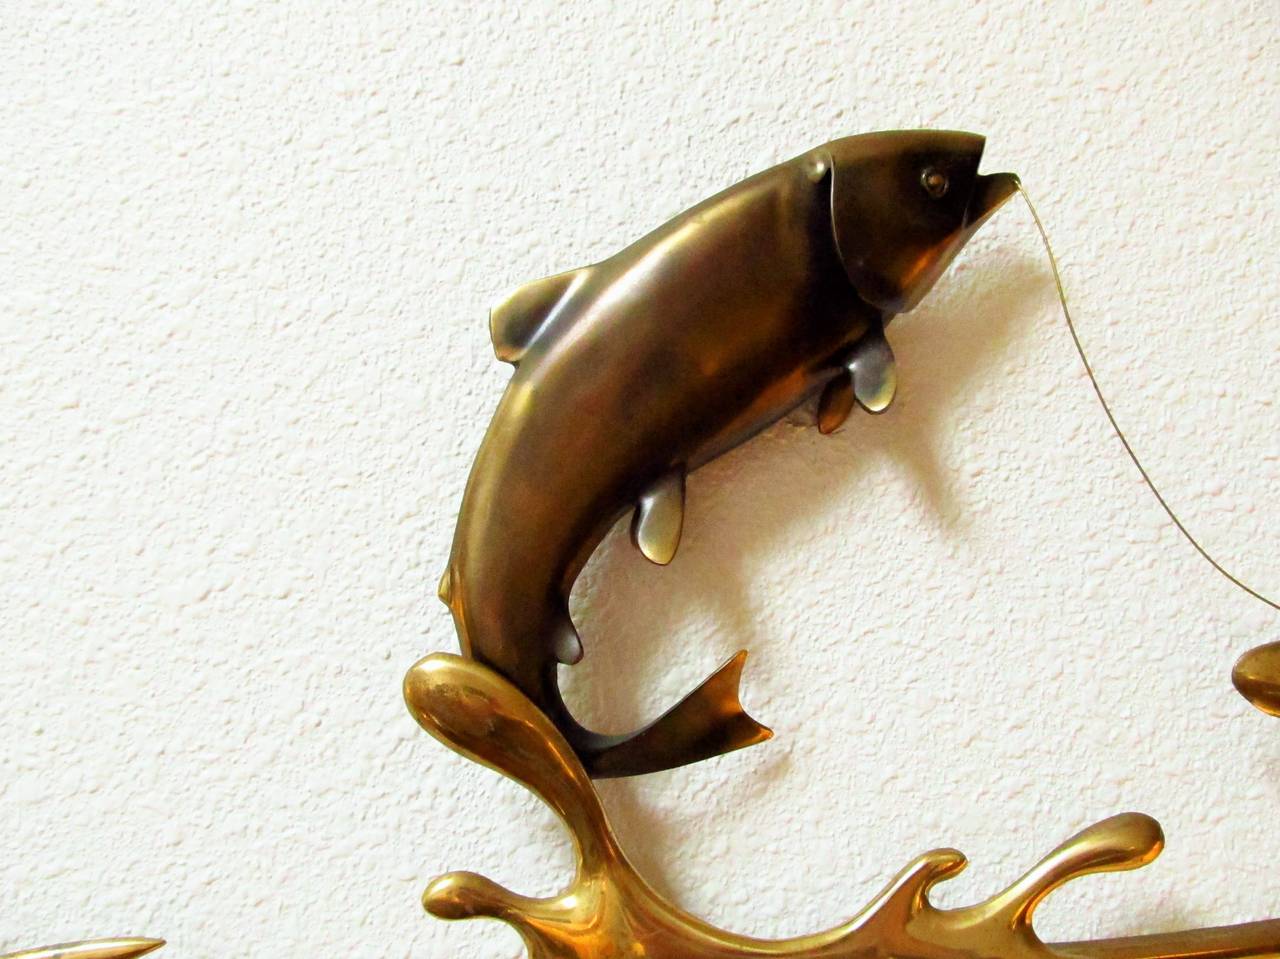 Dynamic Fisherman Wall Sculpture Signed, Bijan, 1985 In Excellent Condition For Sale In Papaikou, HI